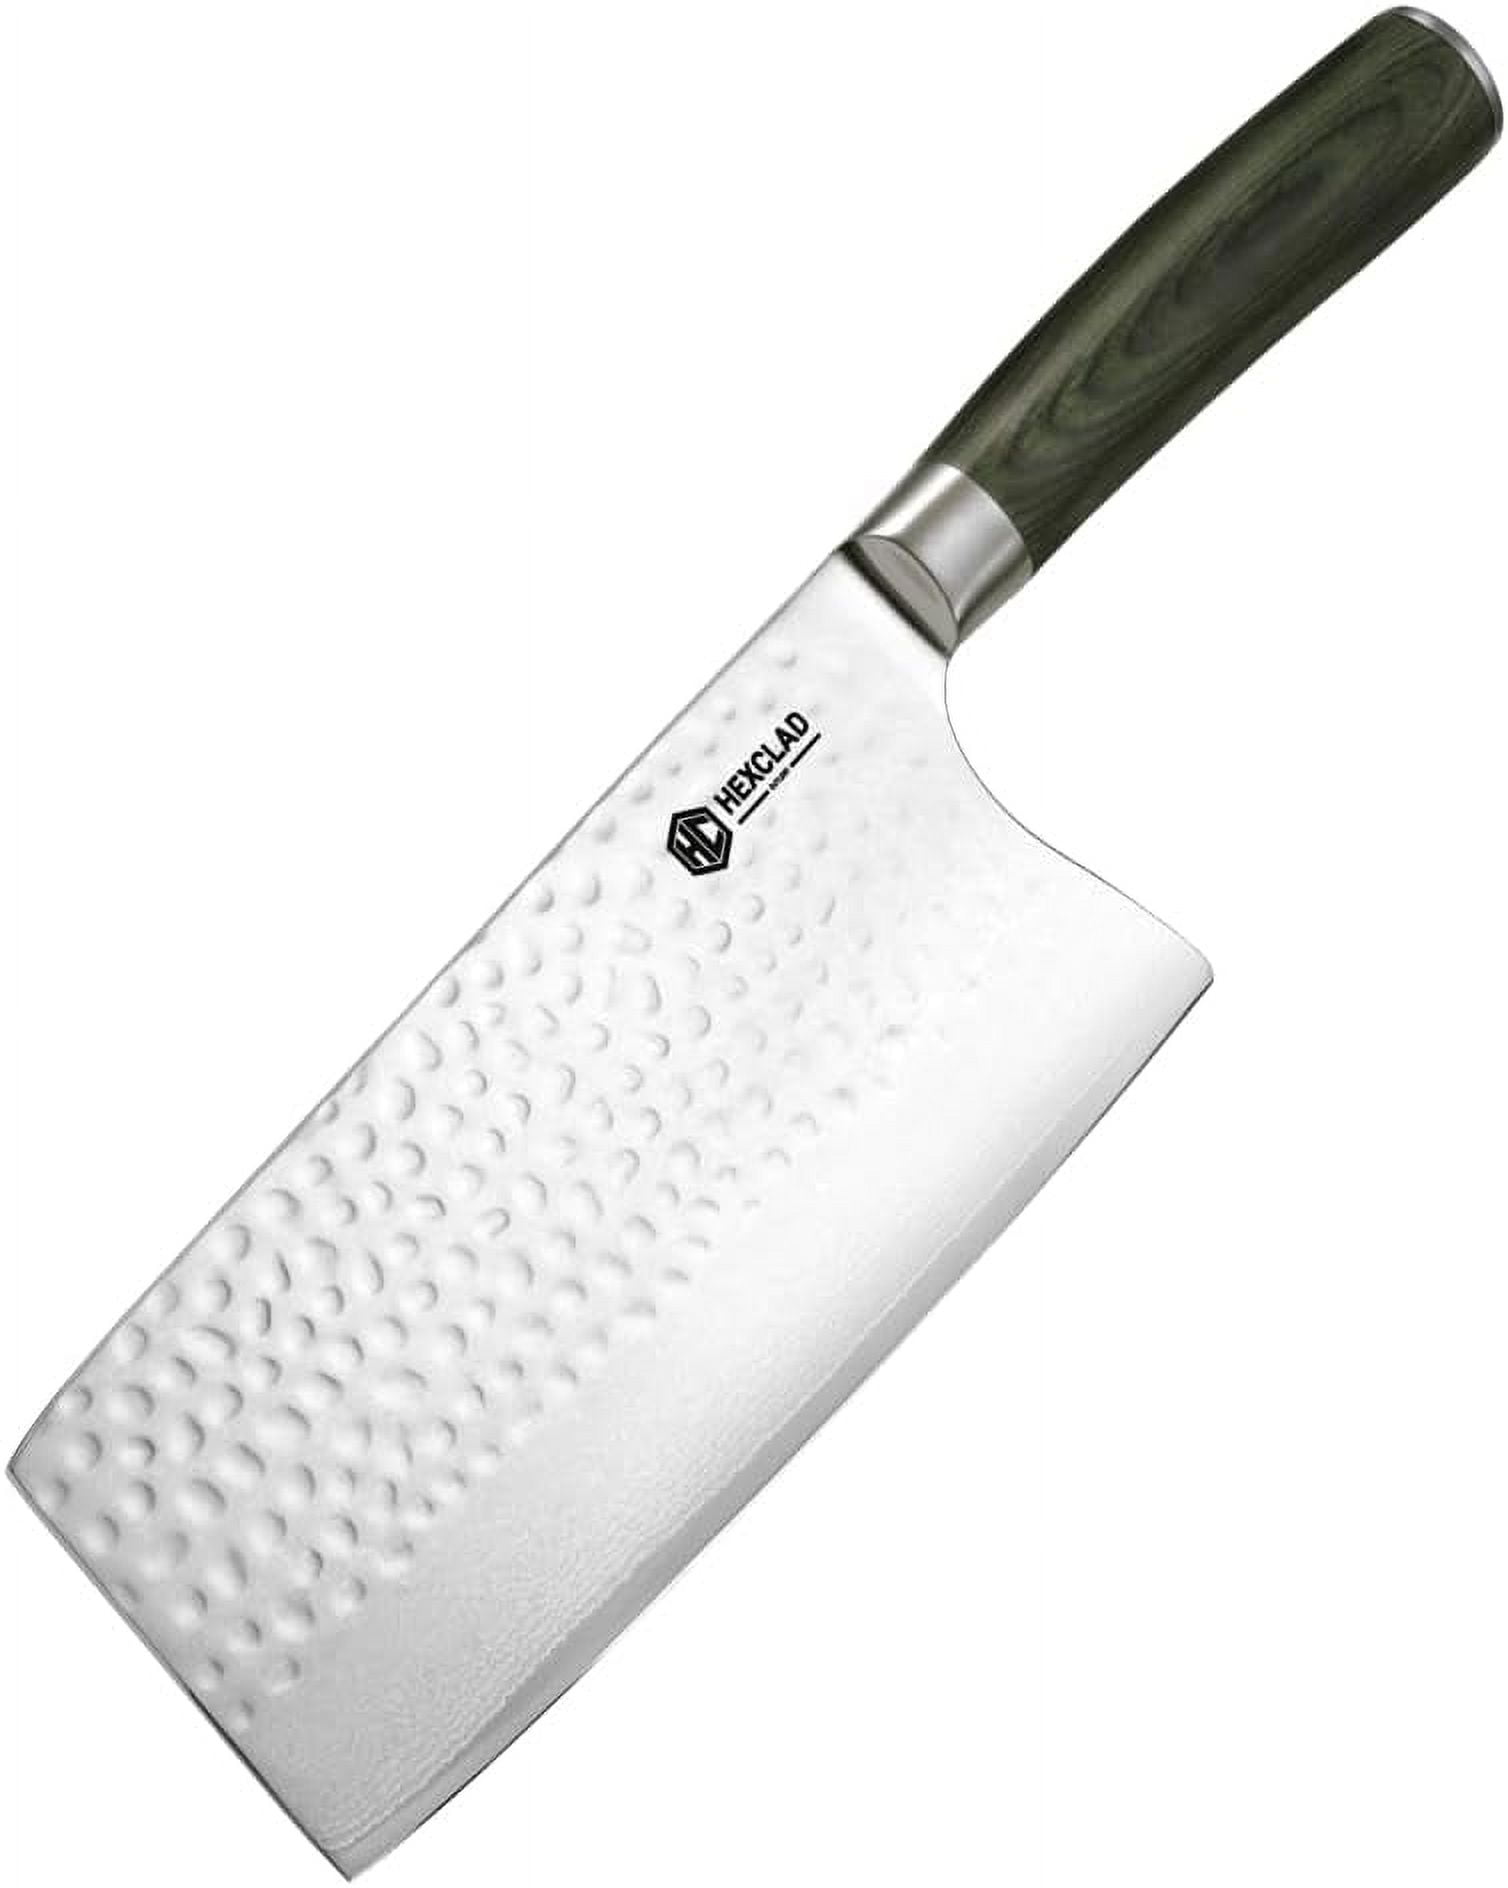 HexClad Knives Review: Gordon Ramsay-approved, but not for every